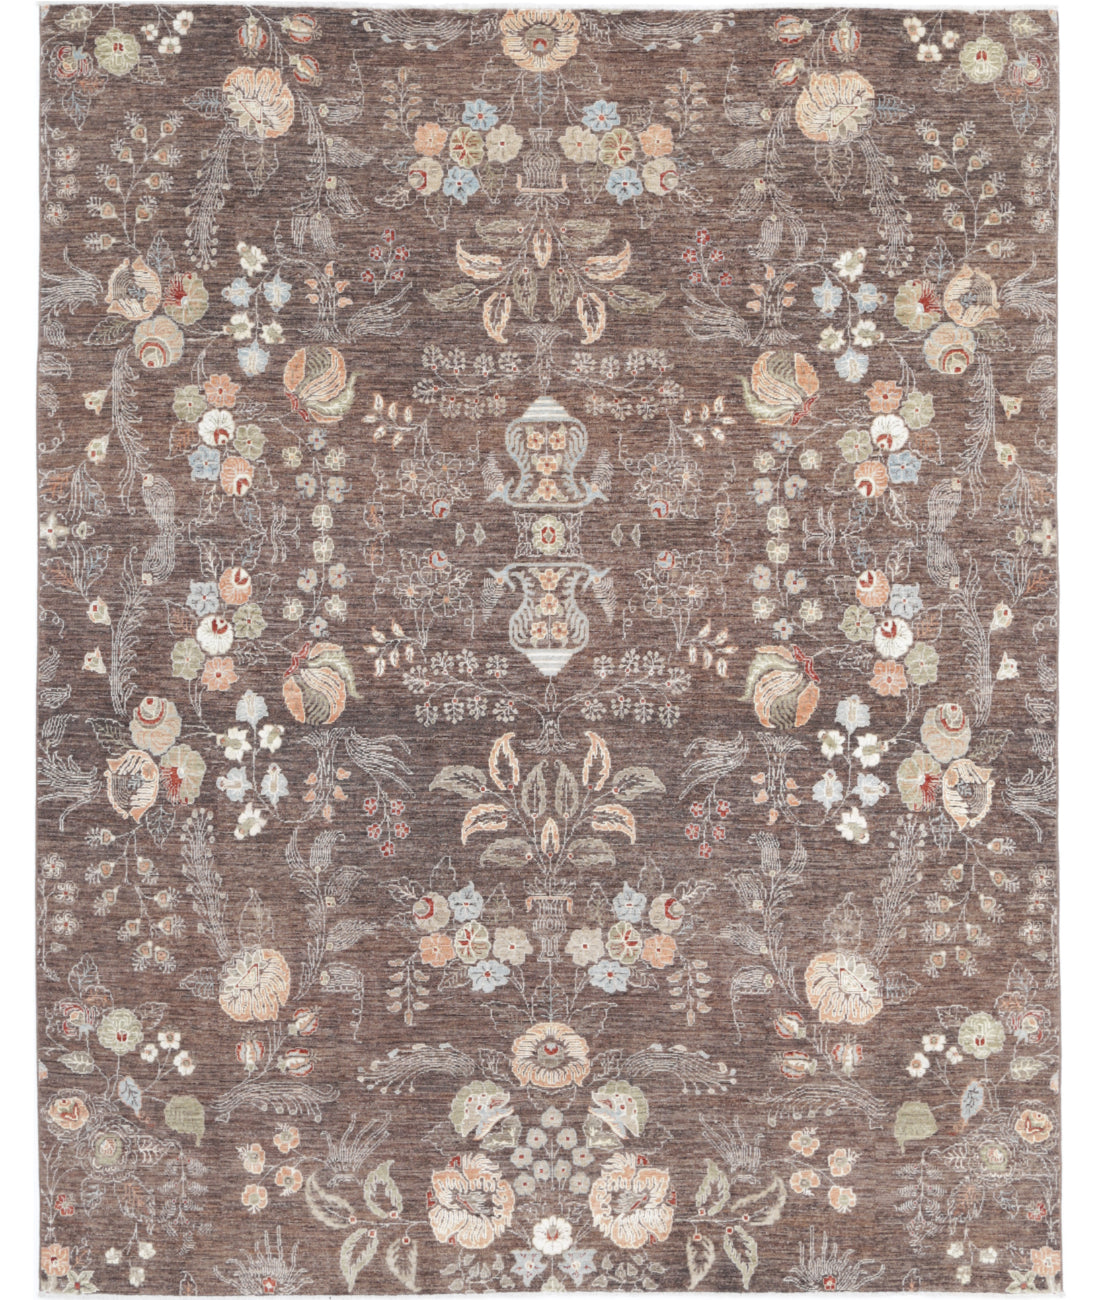 Hand Knotted Artemix Wool Rug - 7'10'' x 9'10'' 7'10'' x 9'10'' (235 X 295) / Brown / Ivory